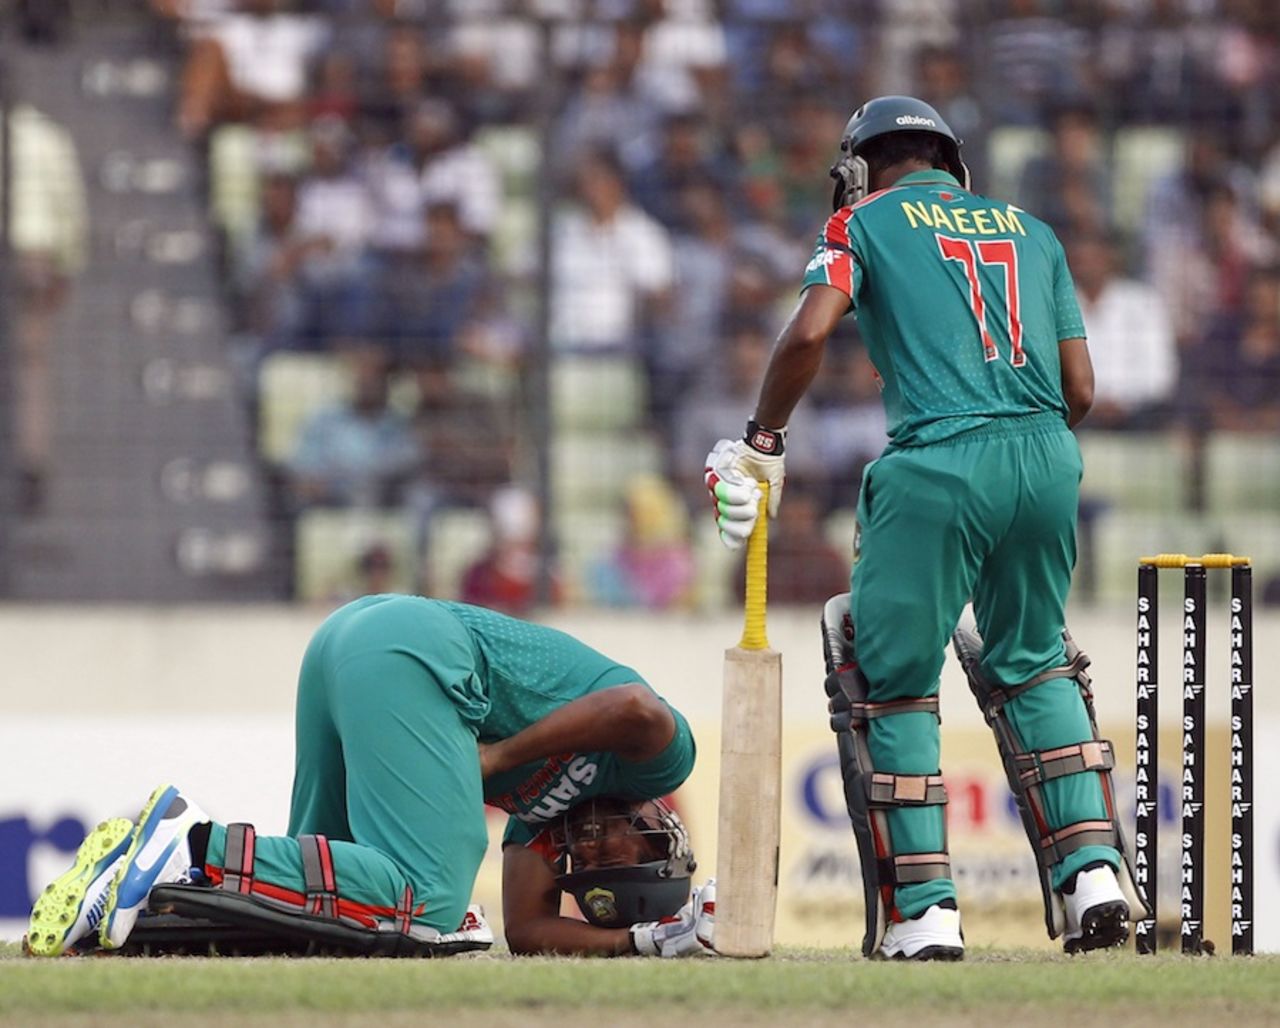 Mahmudullah is in pain after being hit, Bangladesh v New Zealand, 1st ODI, Mirpur, October 29, 2013